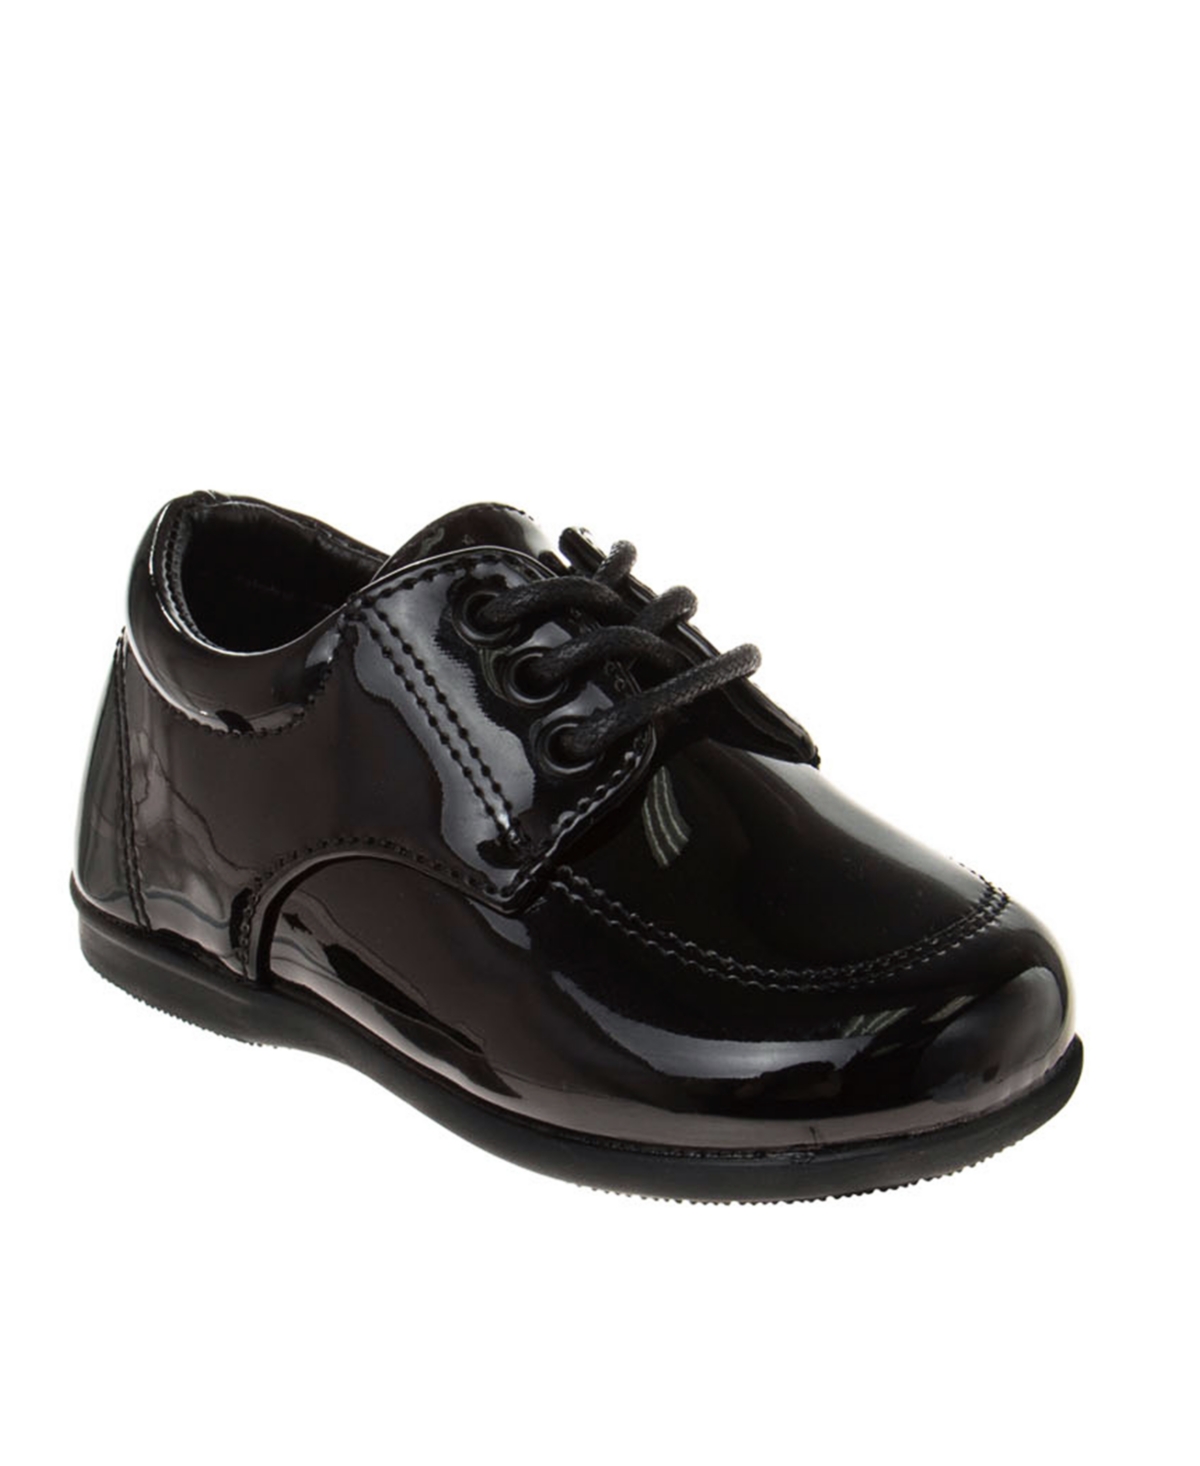 Josmo Kids' Big Boys Lace Up Dress Shoes In Black